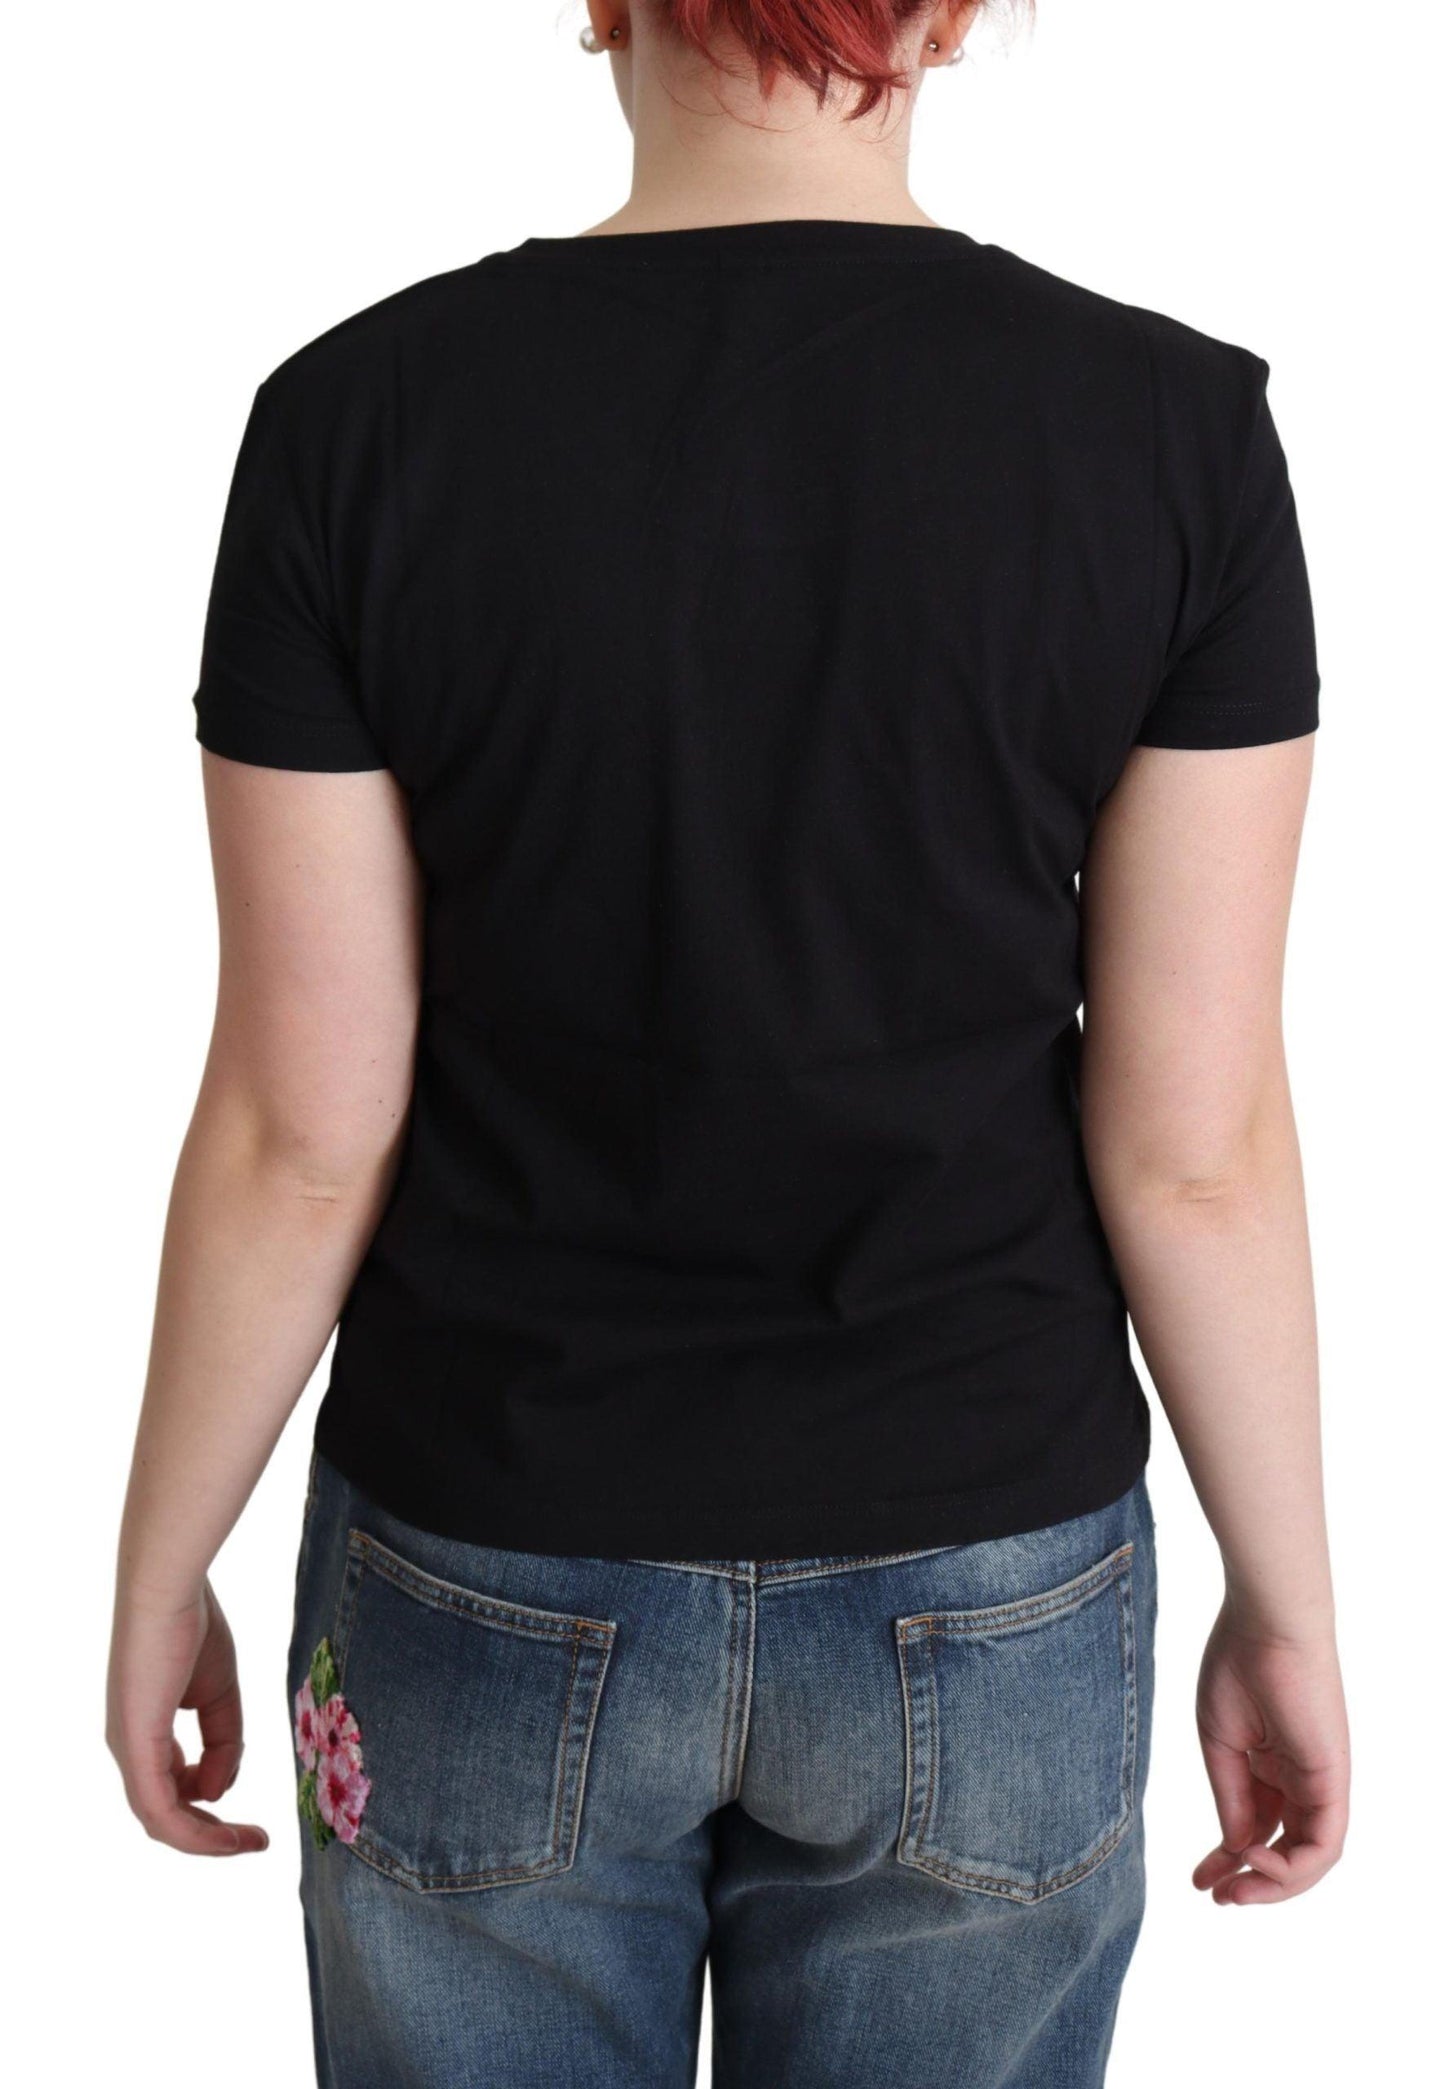 Moschino Chic Black Cotton Tee with Playful Print - PER.FASHION